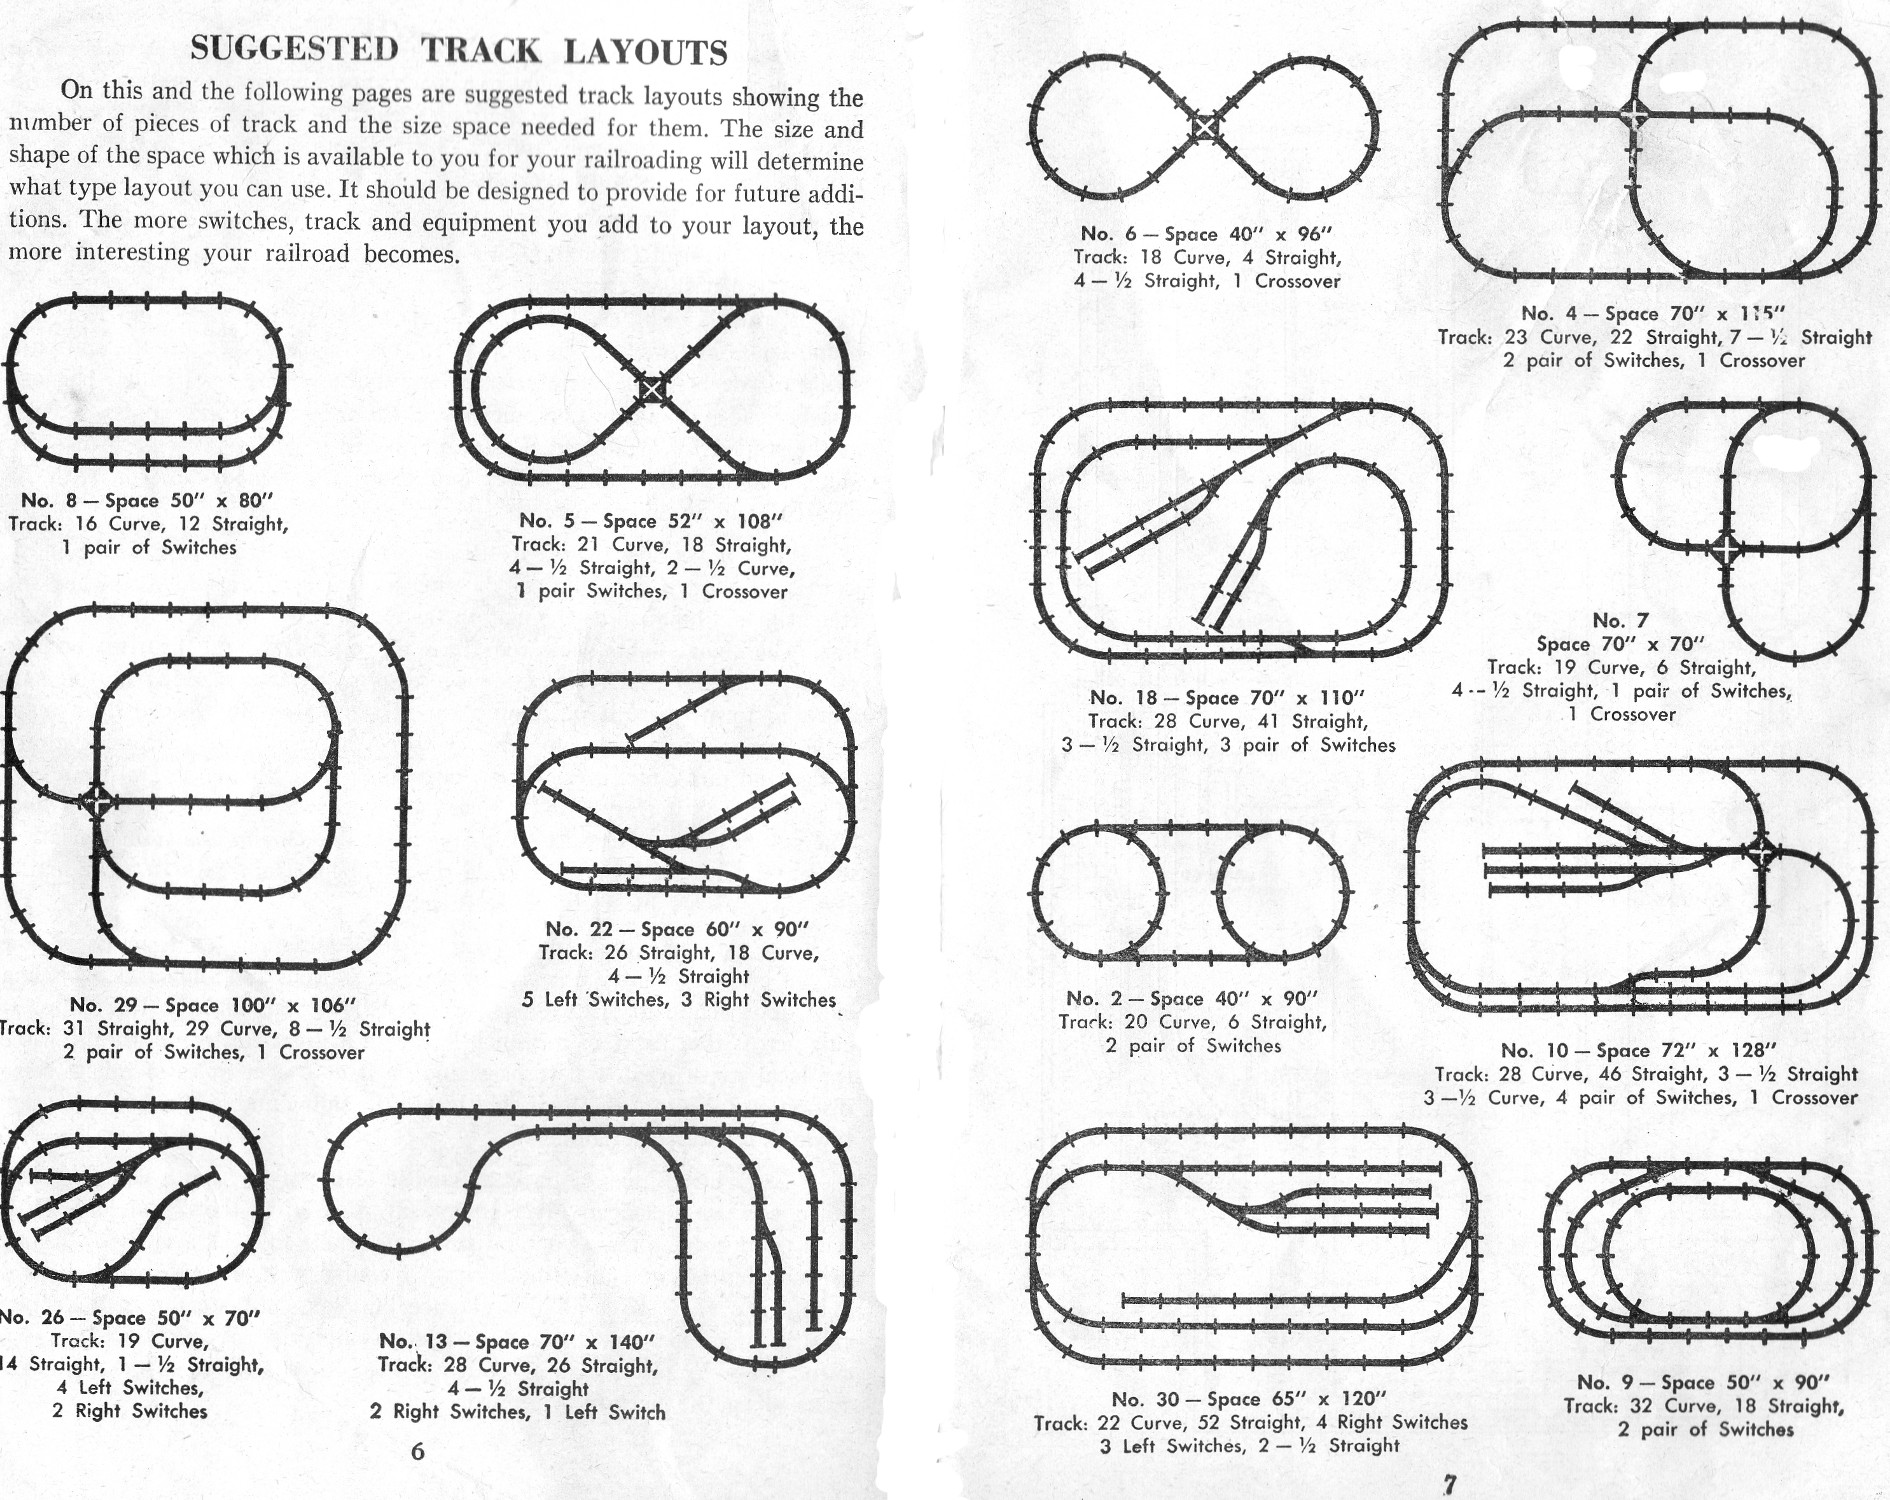 Suggested Track Layouts